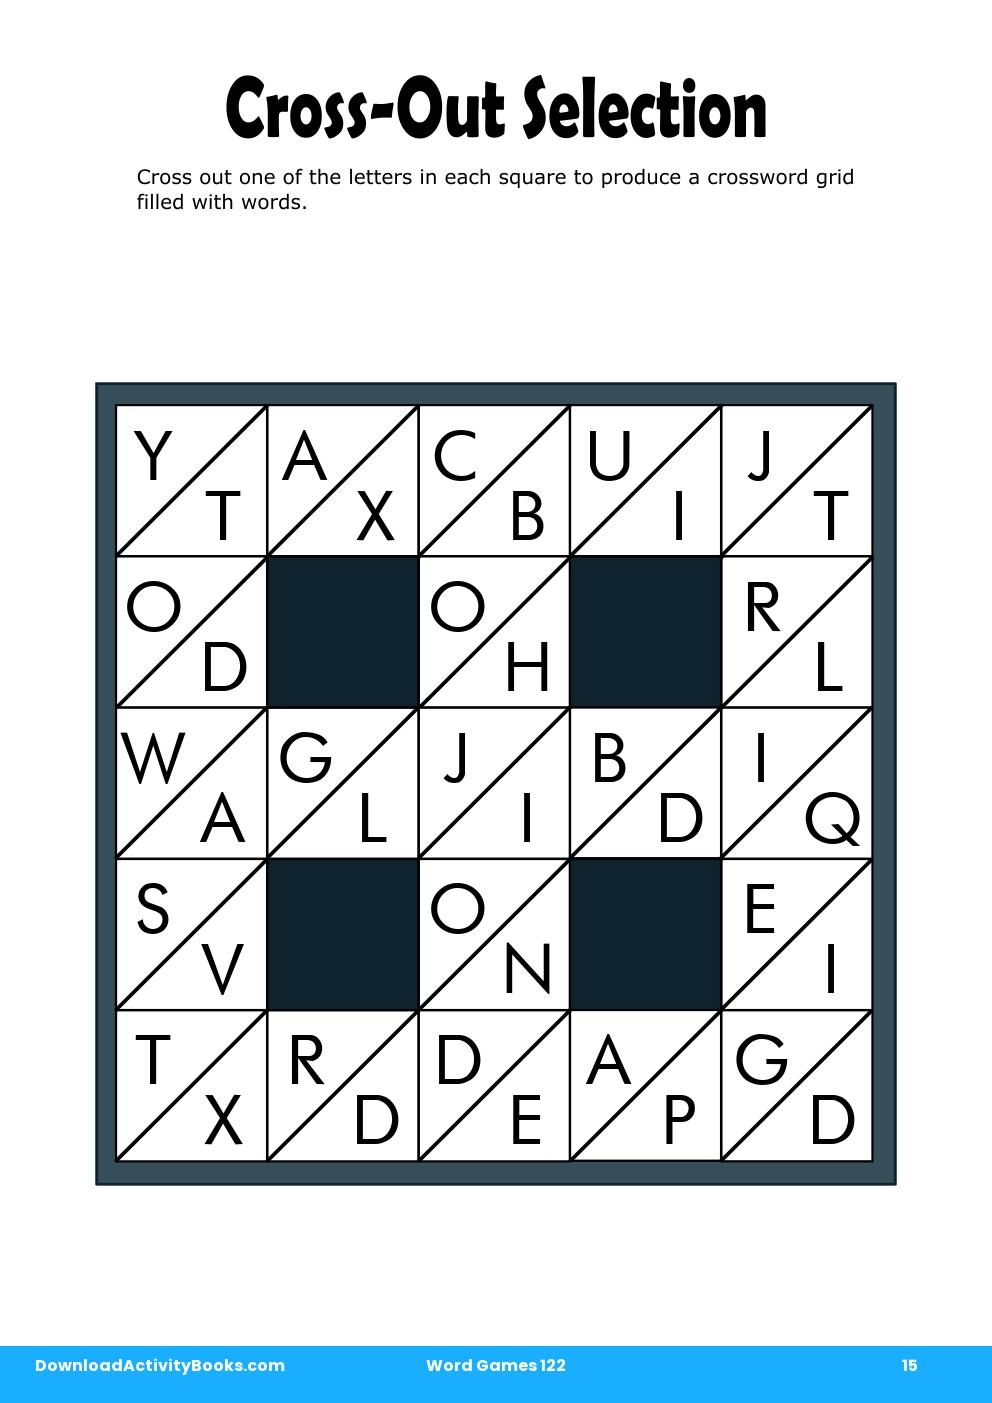 Cross-Out Selection in Word Games 122